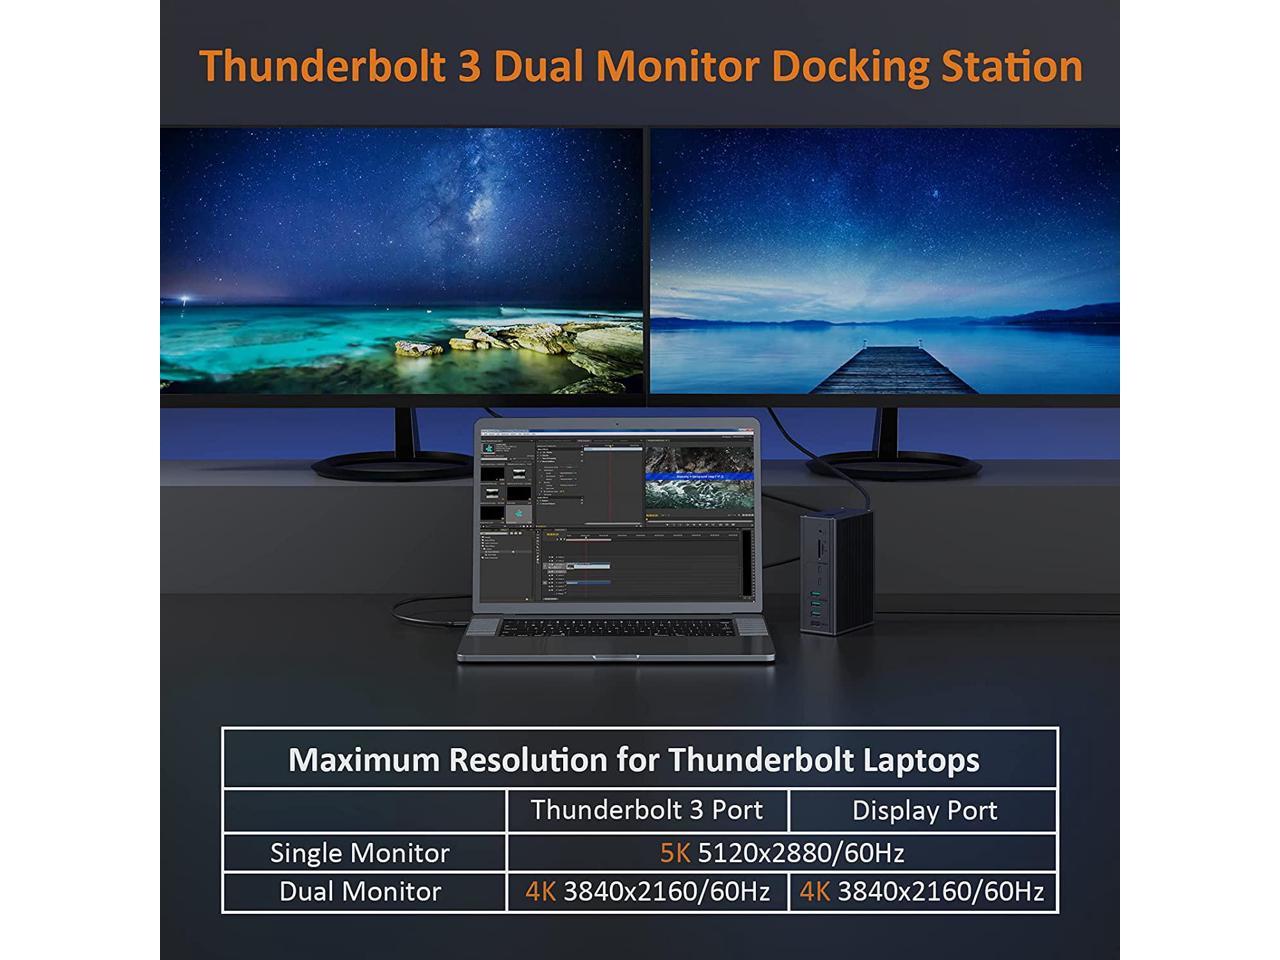 10Gbps Tobenone Thunderbolt 3 Dual Monitor Docking Station for MacBook Pro/Air/Windows ,Compatible with Thunderbolt3/4 Laptop Thunderbolt 3 Dock for Display,UHS-II SD Card Slot,USB-C/ USB3.1 